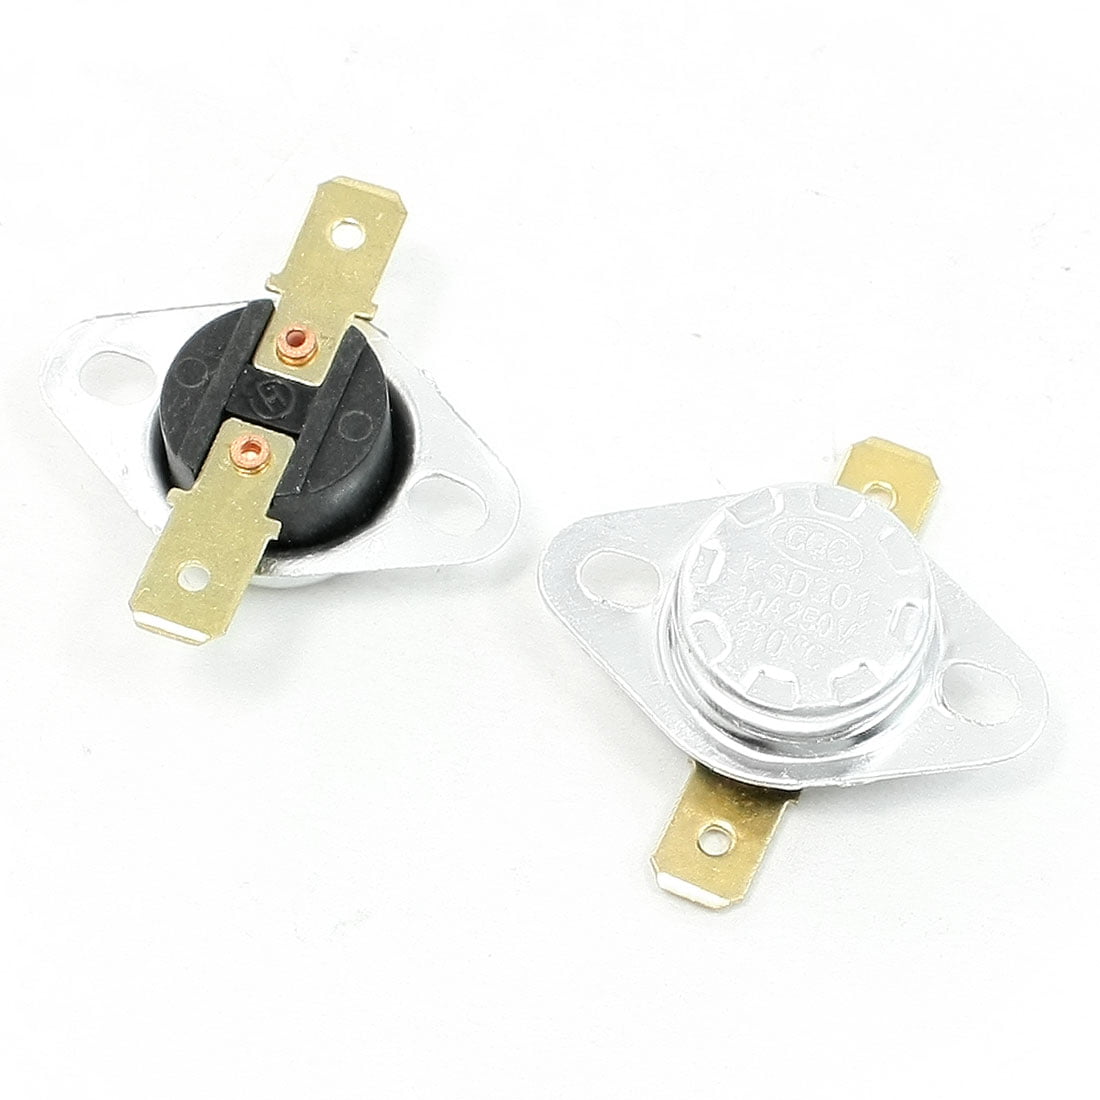 2pcs 10A 250V KSD301 NC Thermostat Temperature Thermal Control Switch 120°C 